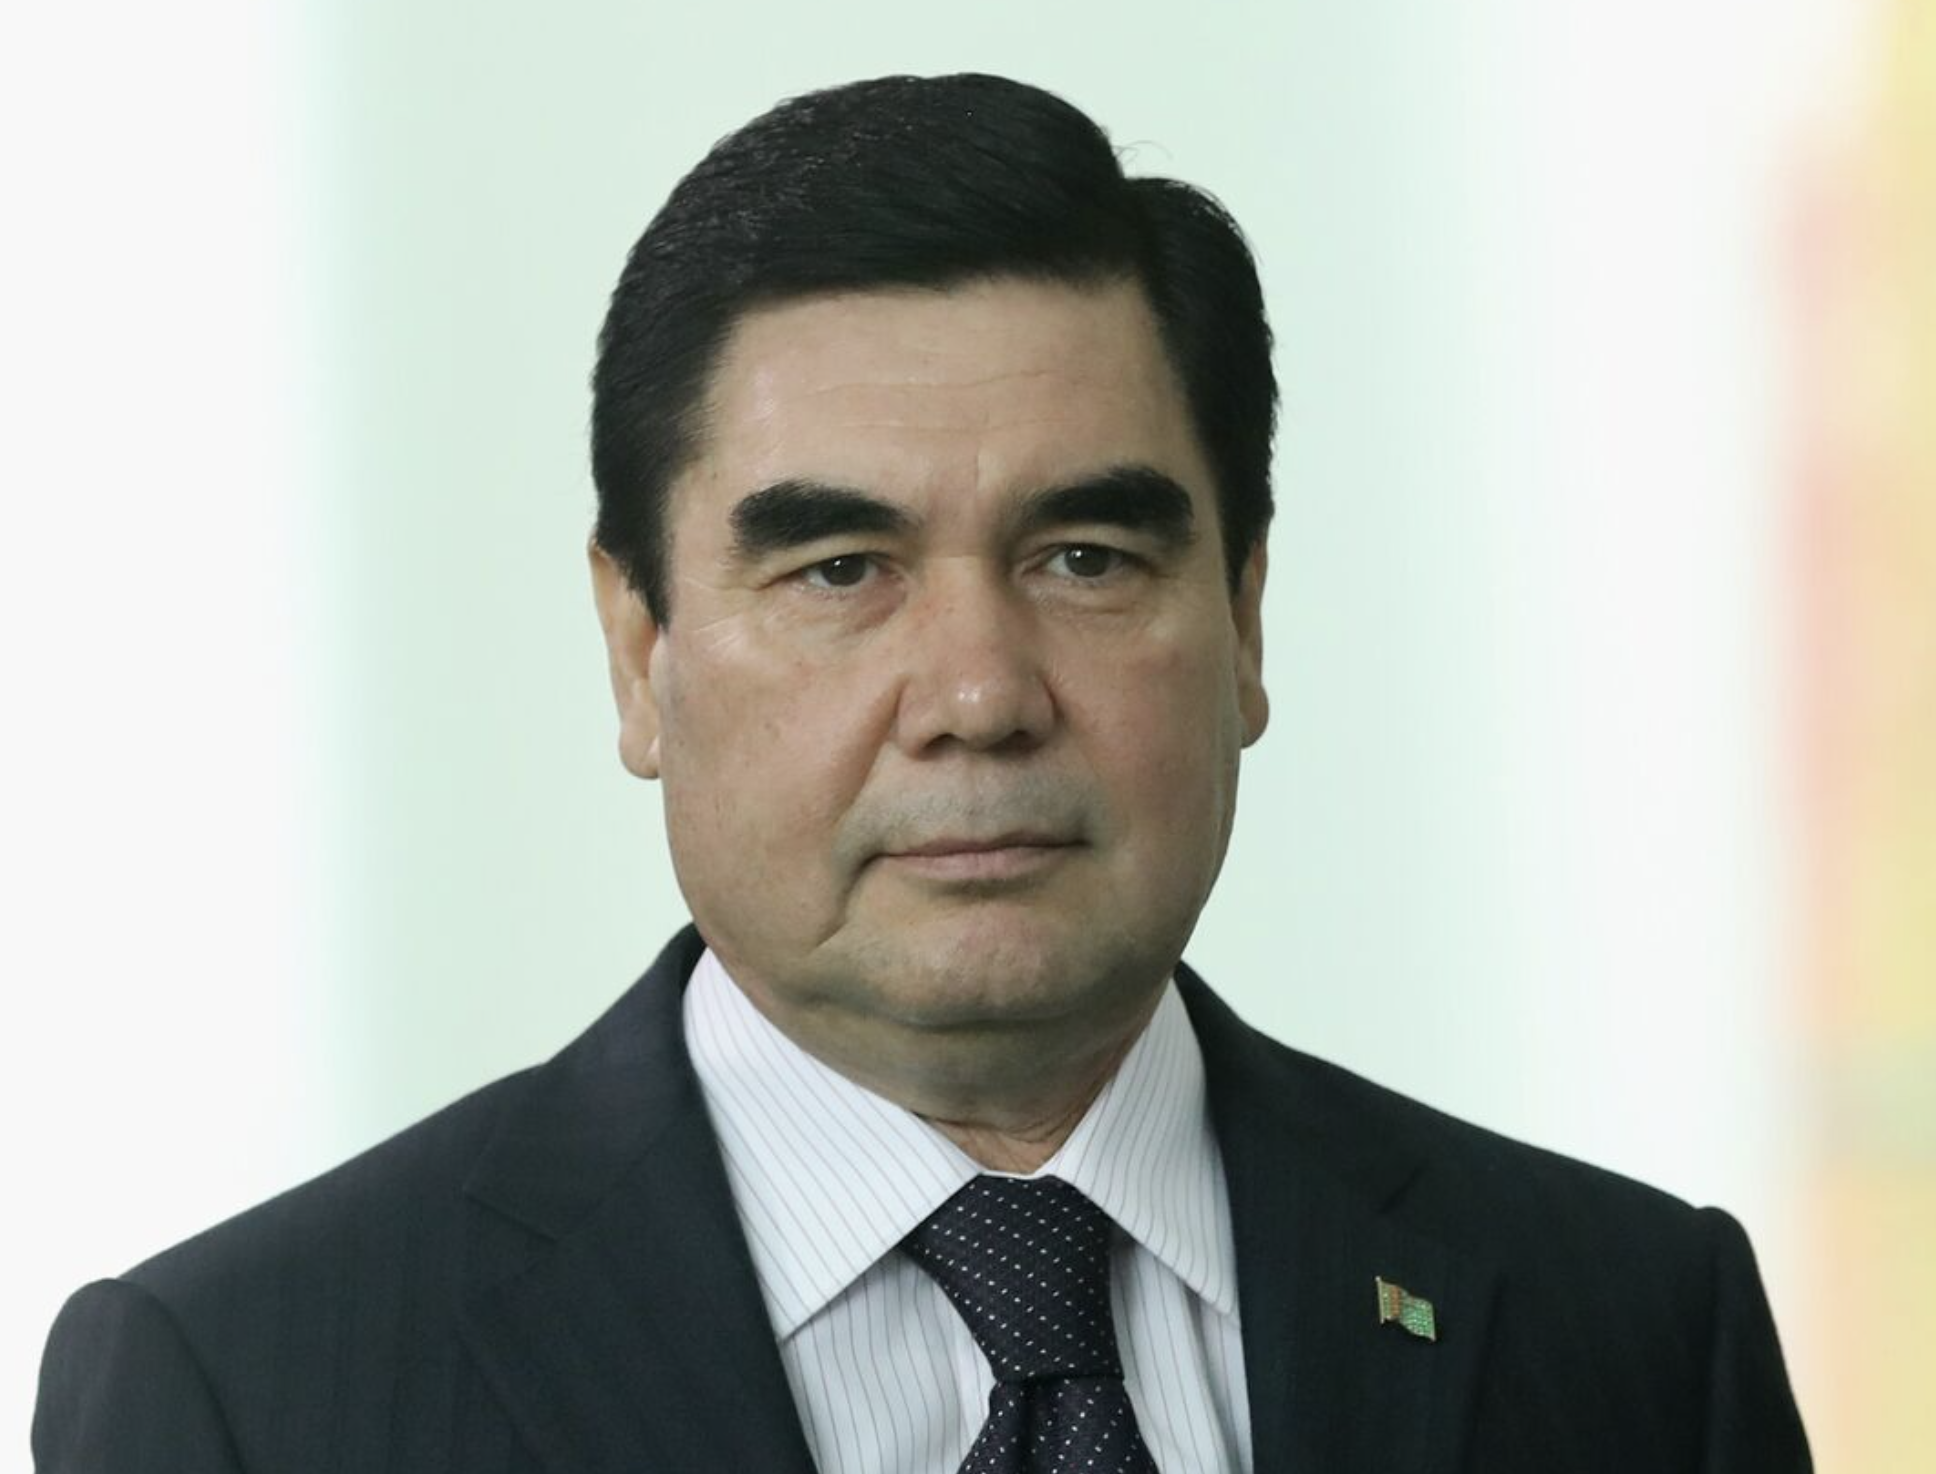 As Chairman of the People's Council of Turkmenistan, Berdymukhamedov has taken several bold stances … his eyebrows included. 